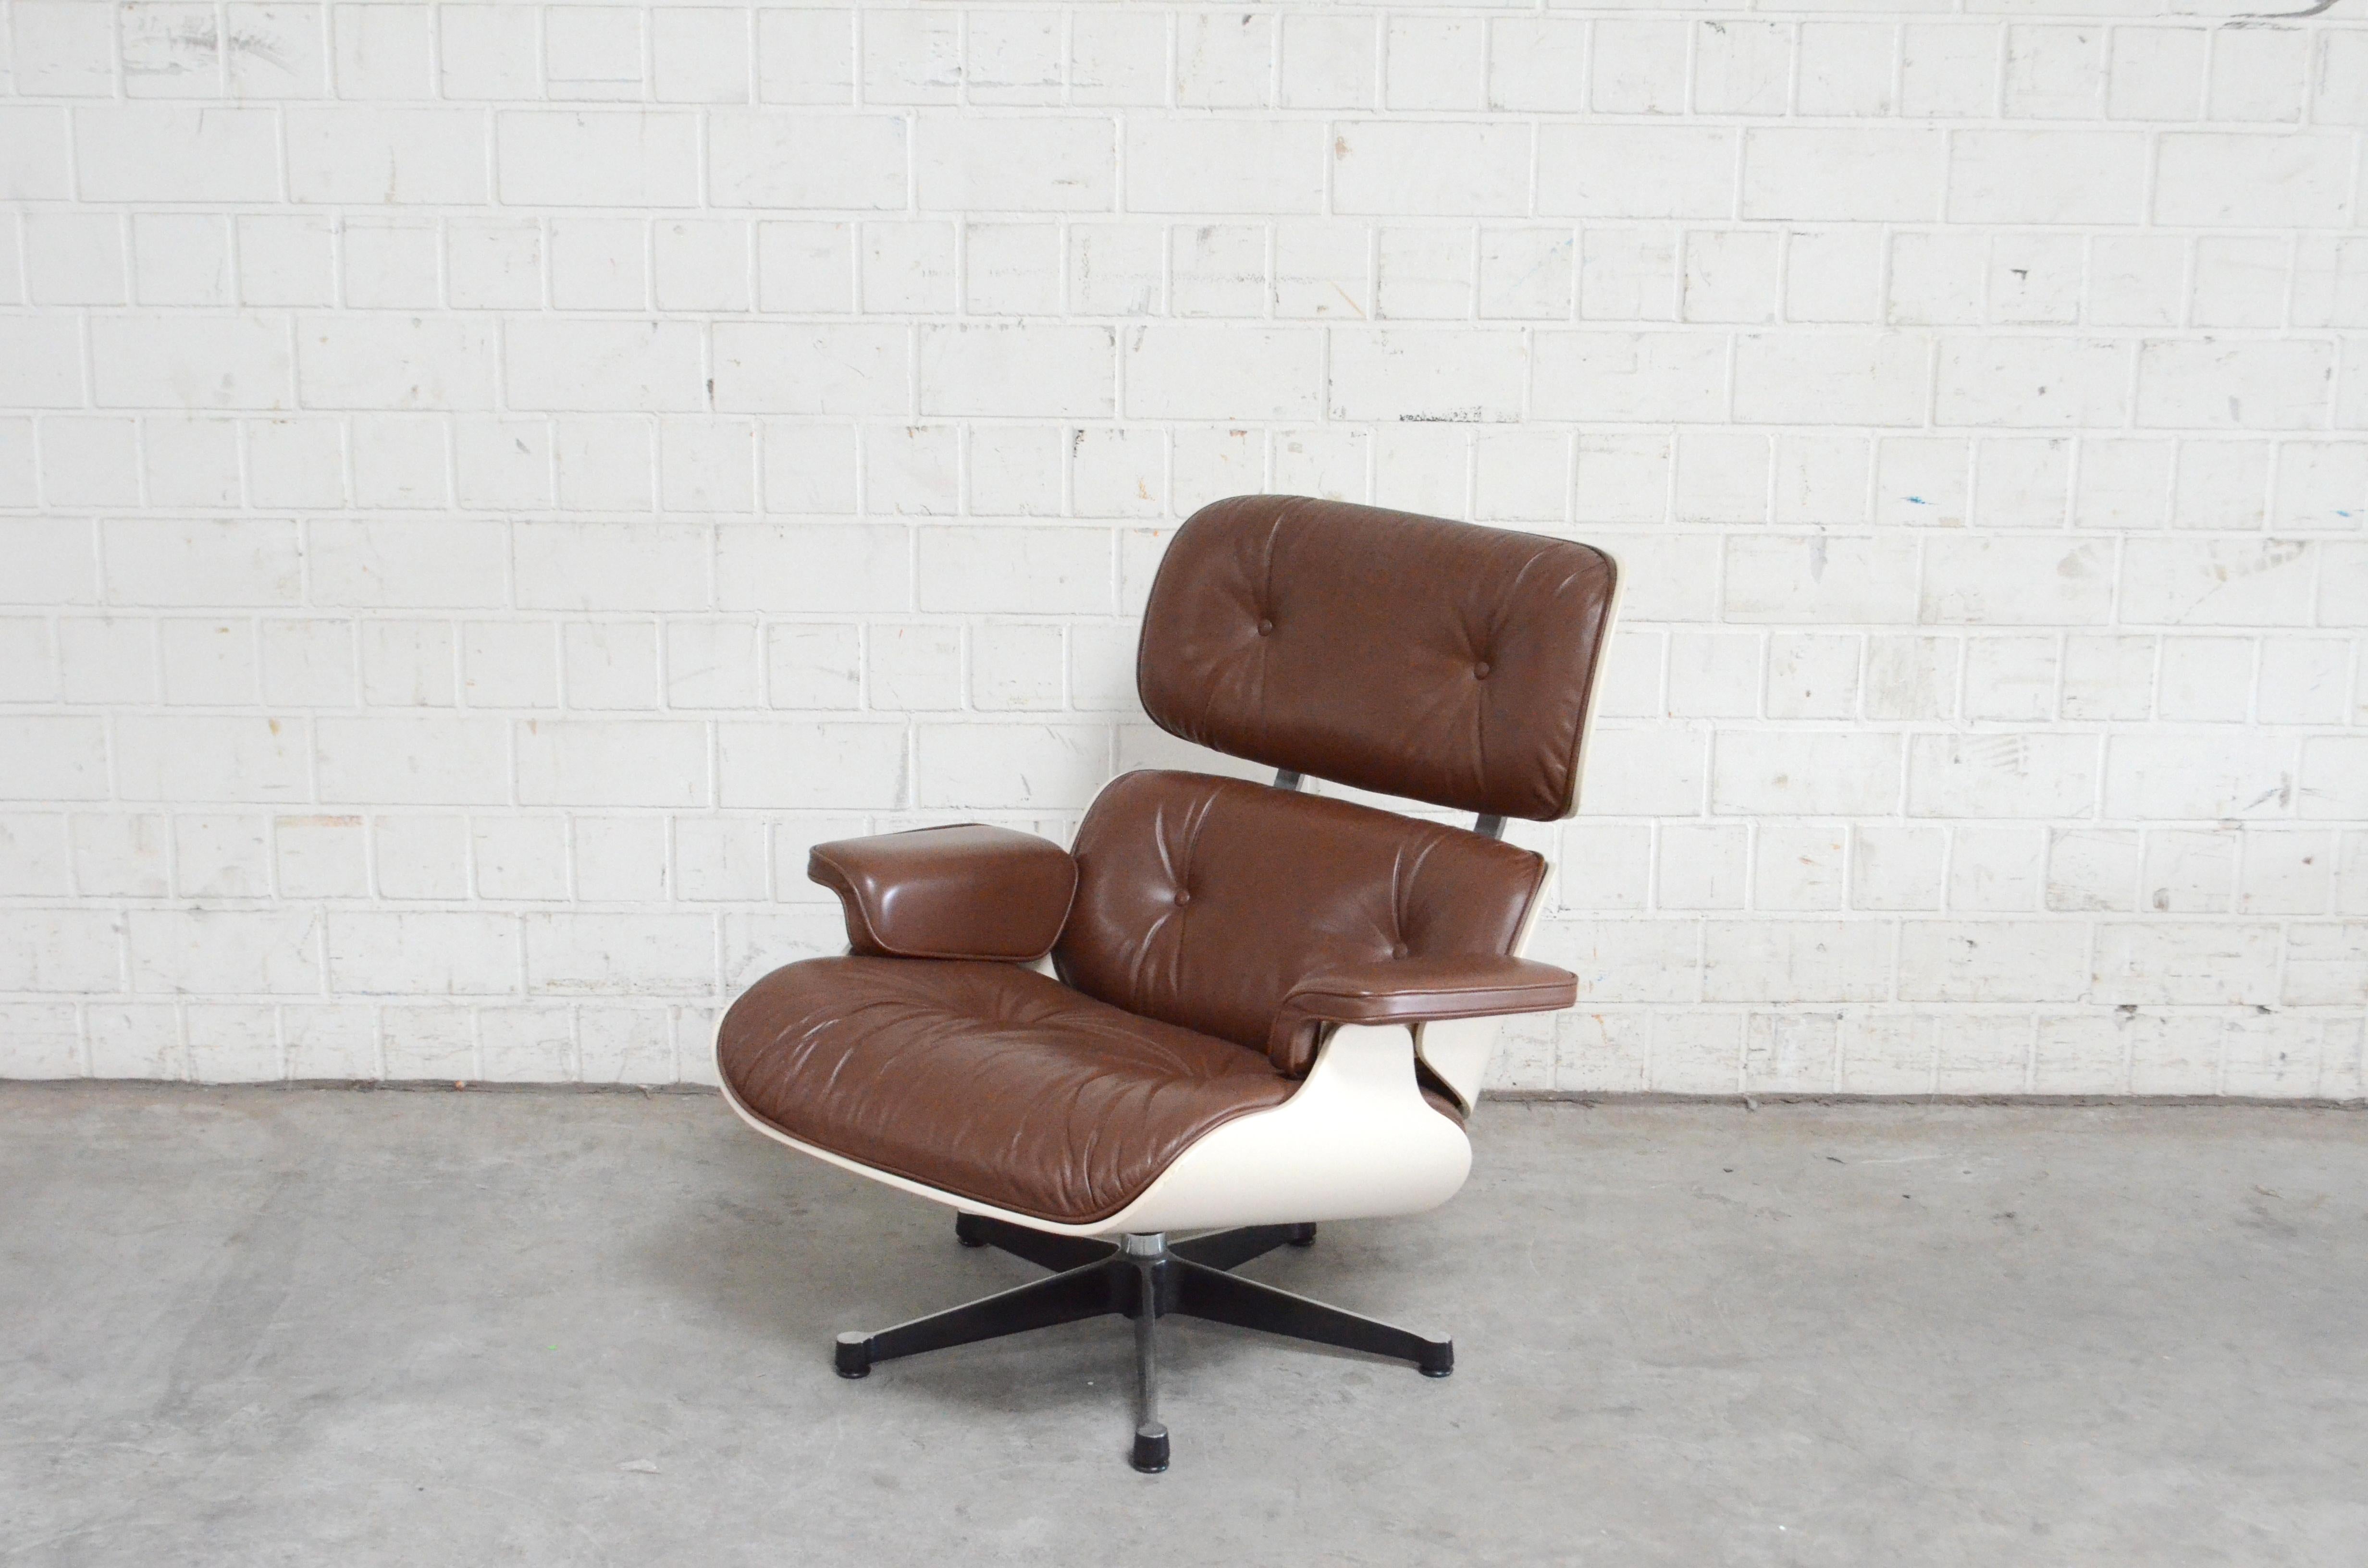 Vitra Eames Lounge Chair Cognac Brown and White Shell, Set of 2 In Good Condition For Sale In Munich, Bavaria